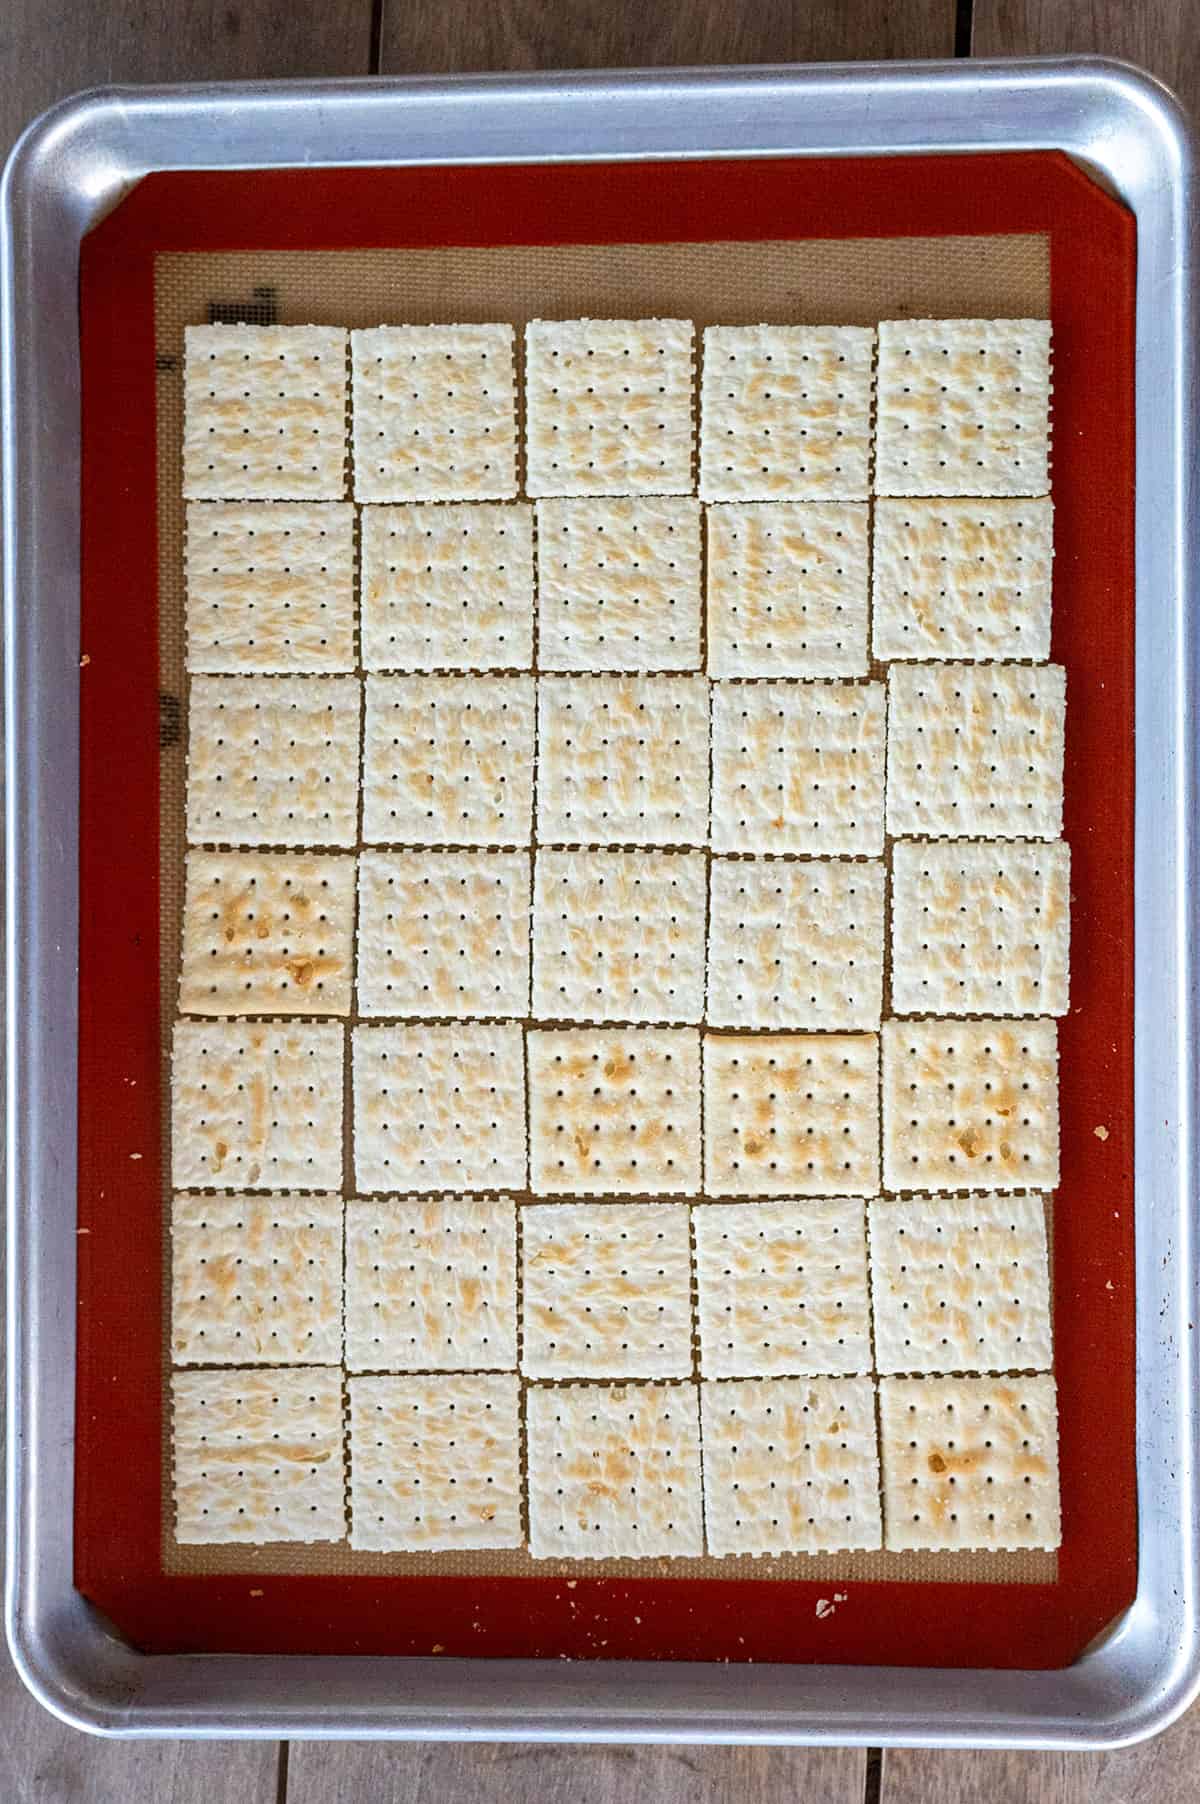 saltines spread out on lined baking sheet.